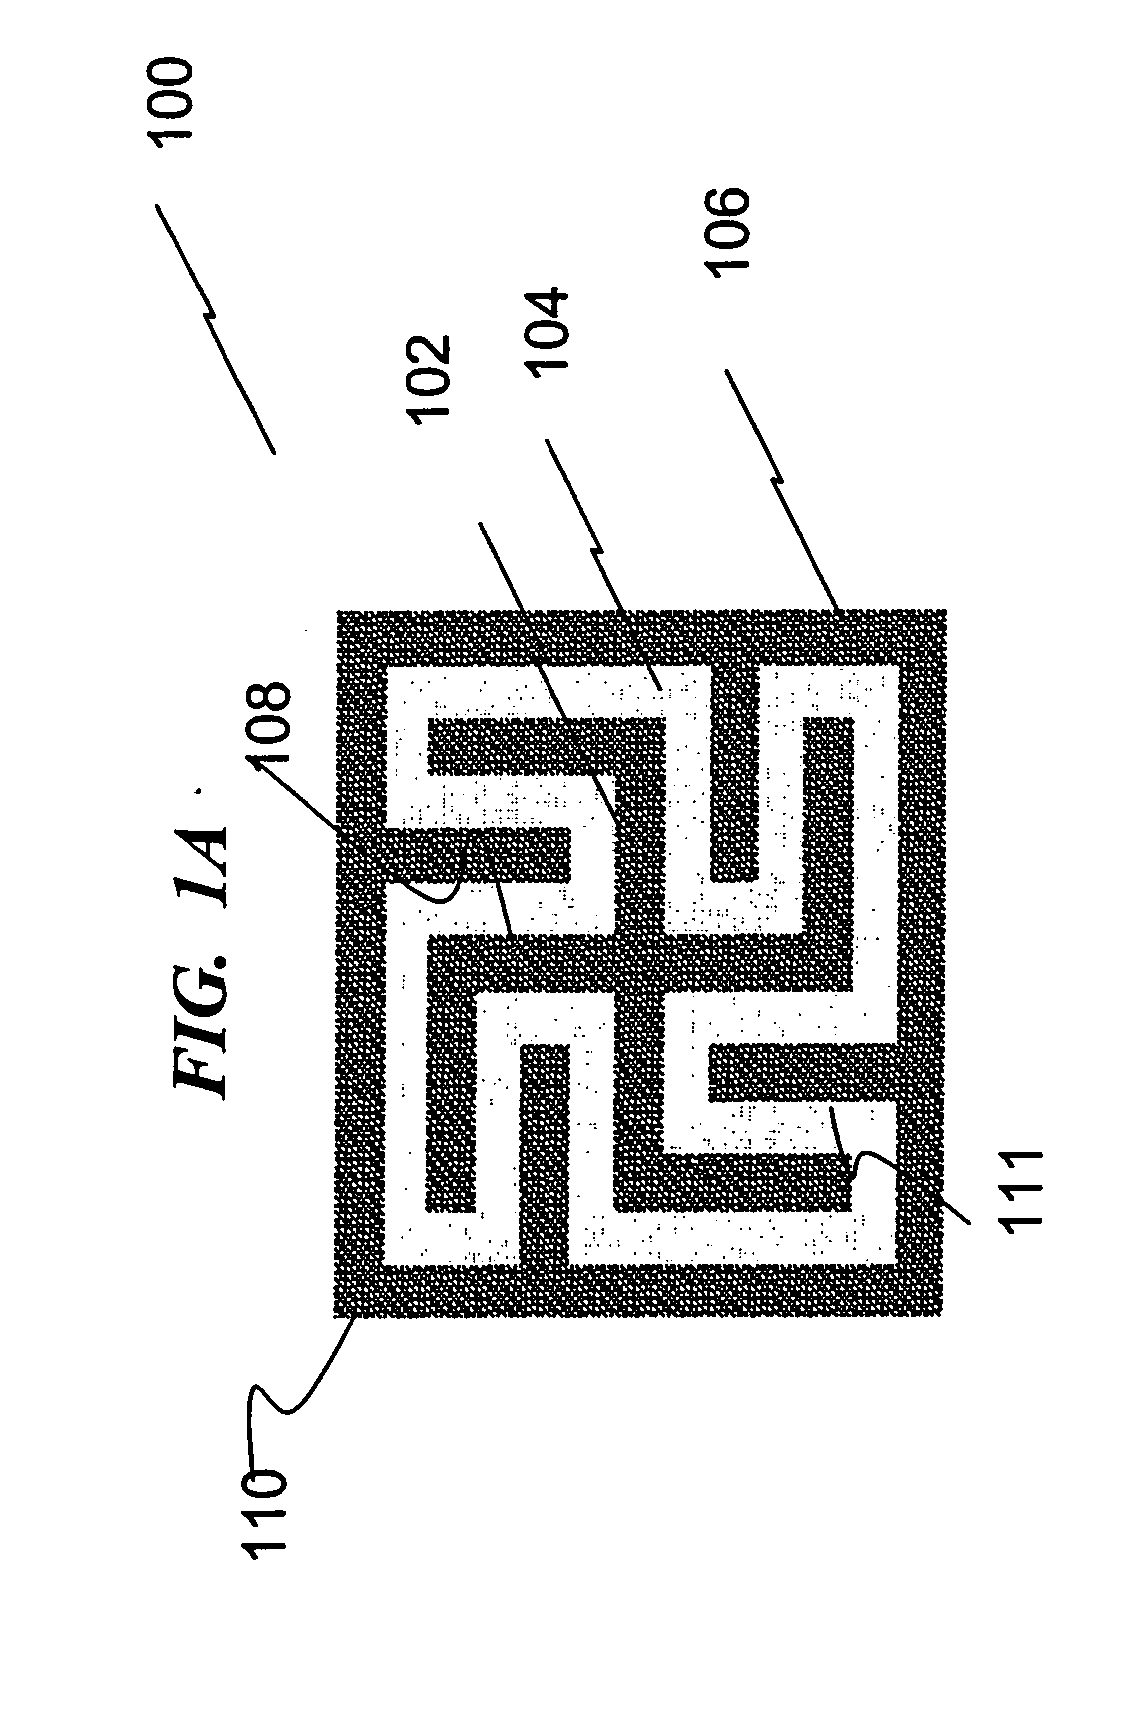 Metal-over-metal devices and the method for manufacturing same